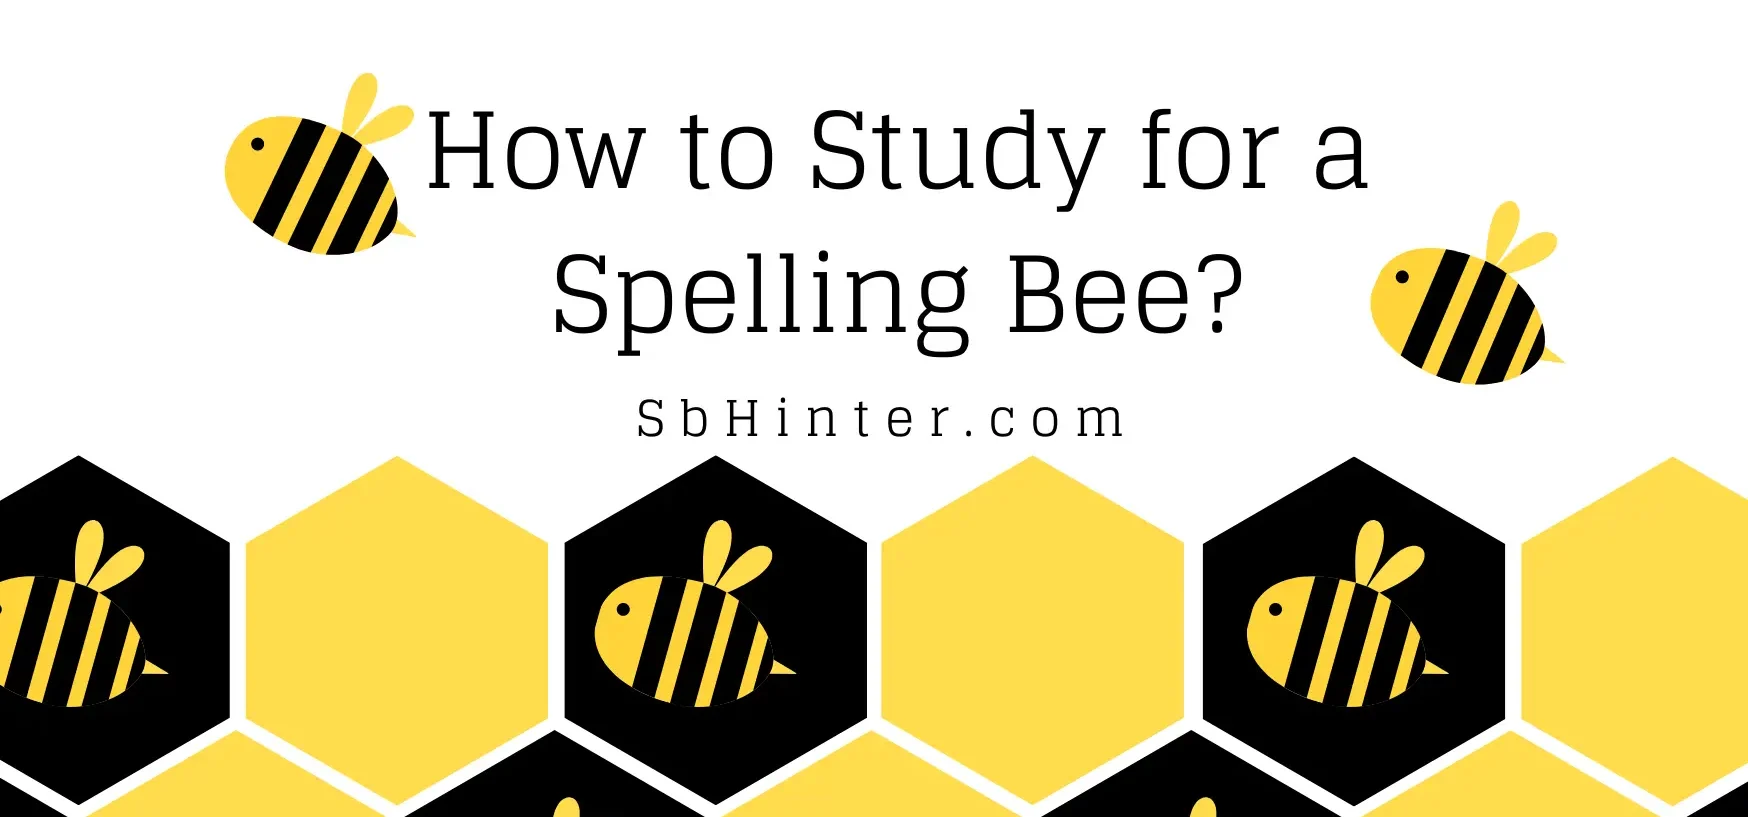 How to Study for Spelling Bee